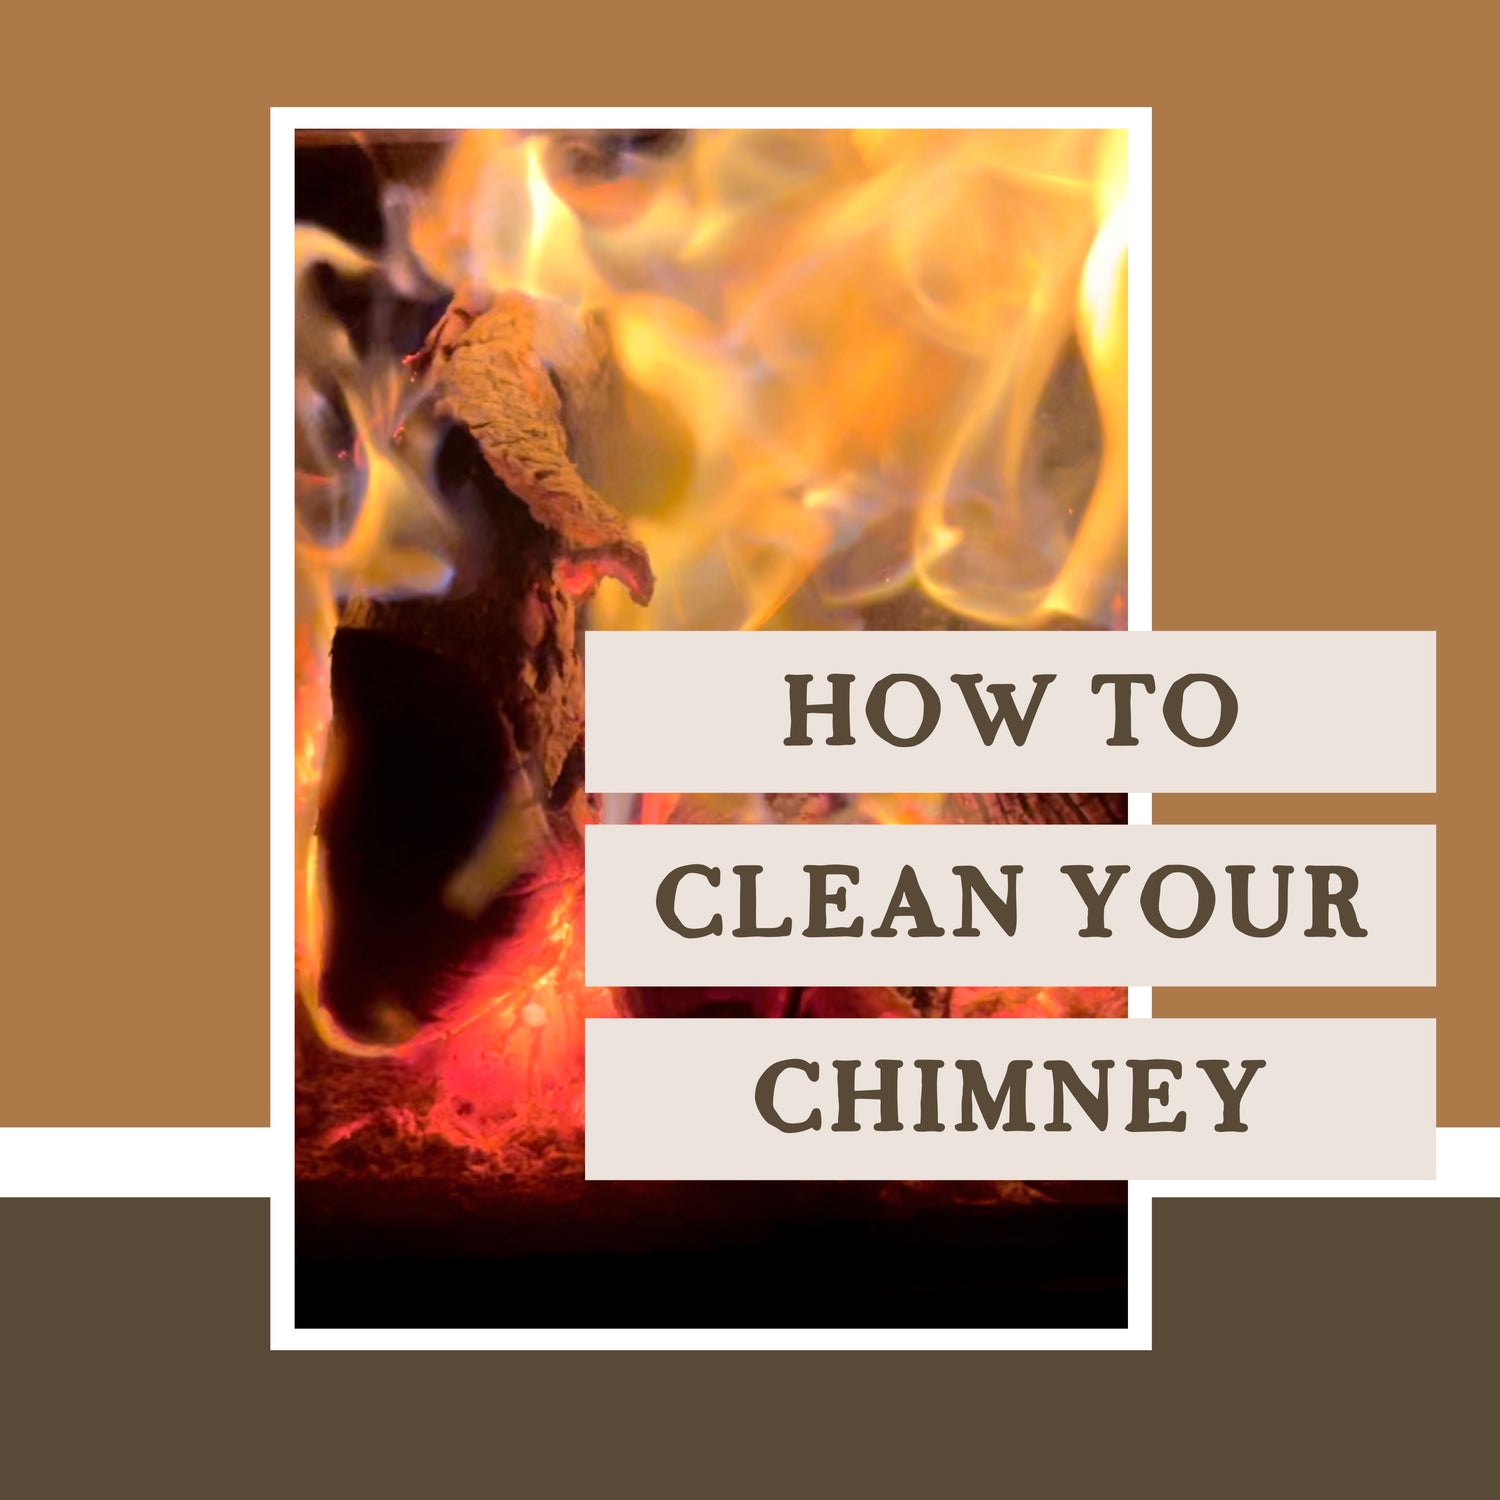 Preparing Your Wood Stove for Winter: A Guide to Effective Chimney Cleaning